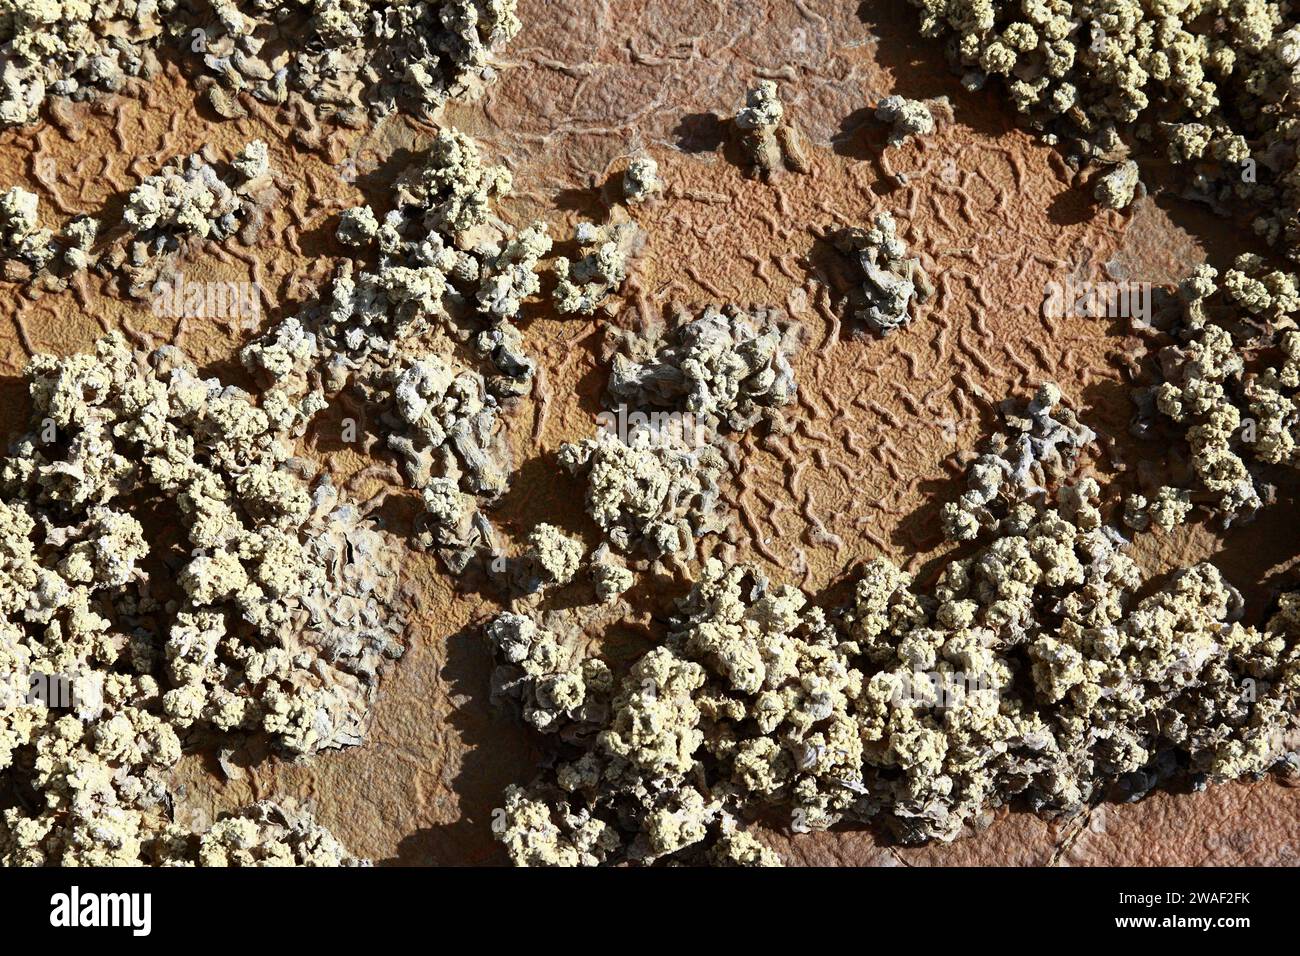 Detail of precipitated sulphur / sulfur minerals on surface of tailings waste from nearby mines on outskirts of Potosi, Bolivia Stock Photo